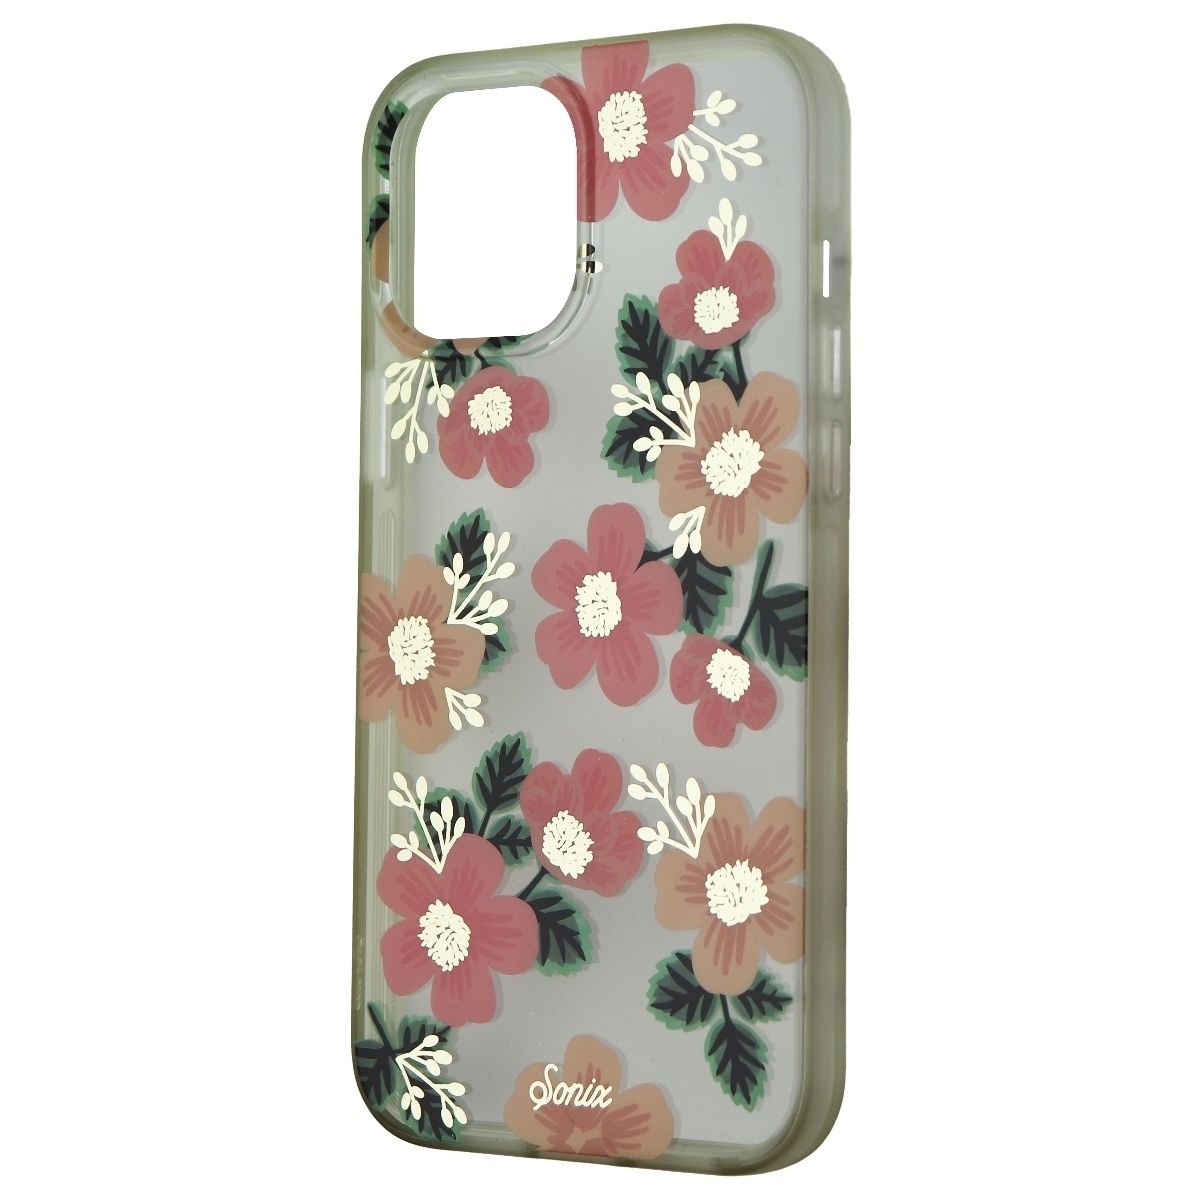 Sonix Hardshell Series Case For Apple IPhone 12 Pro Max - Southern Floral